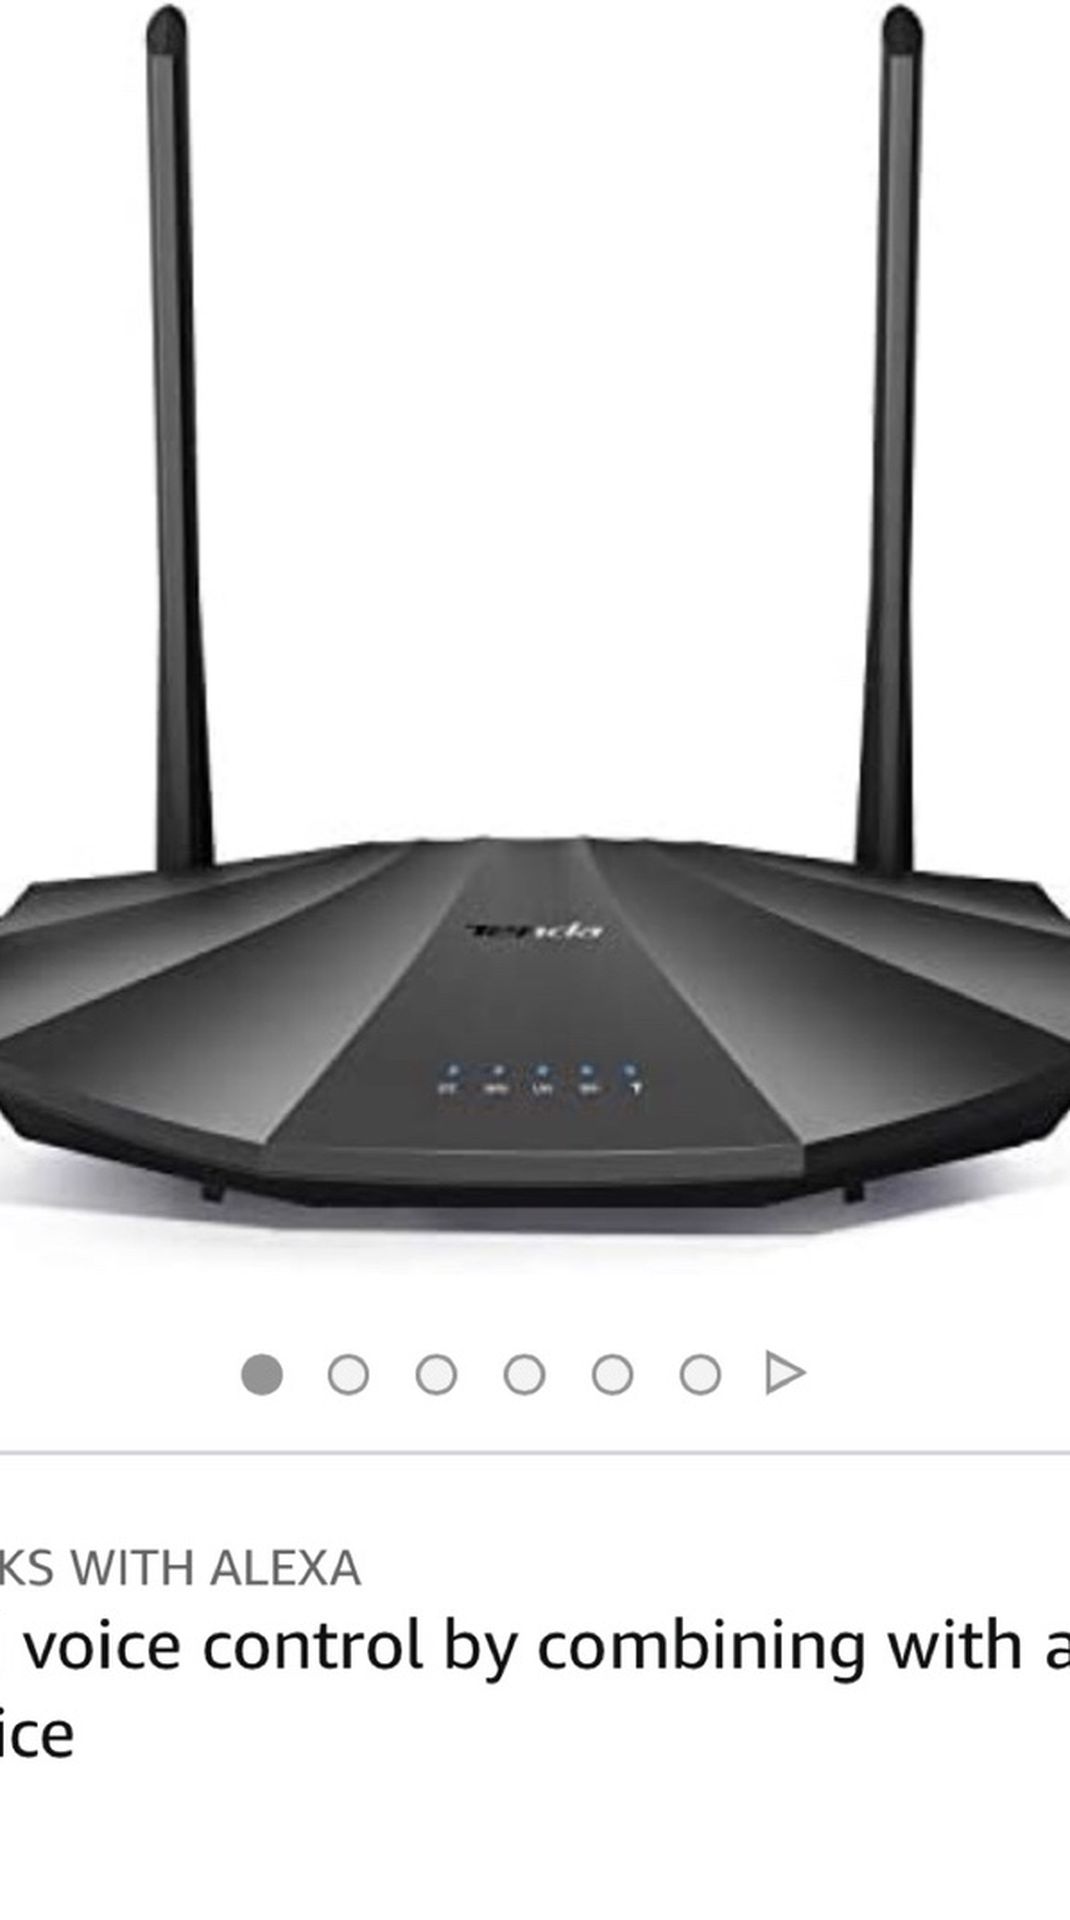 Tenda AC2100 Smart WiFi Router AC19 - Dual Band Gigabit Wireless (up to 2033 Mbps) Internet Router for Home | 4 LAN Ports+1 USB Port | 4X4 MU-MIMO Tec